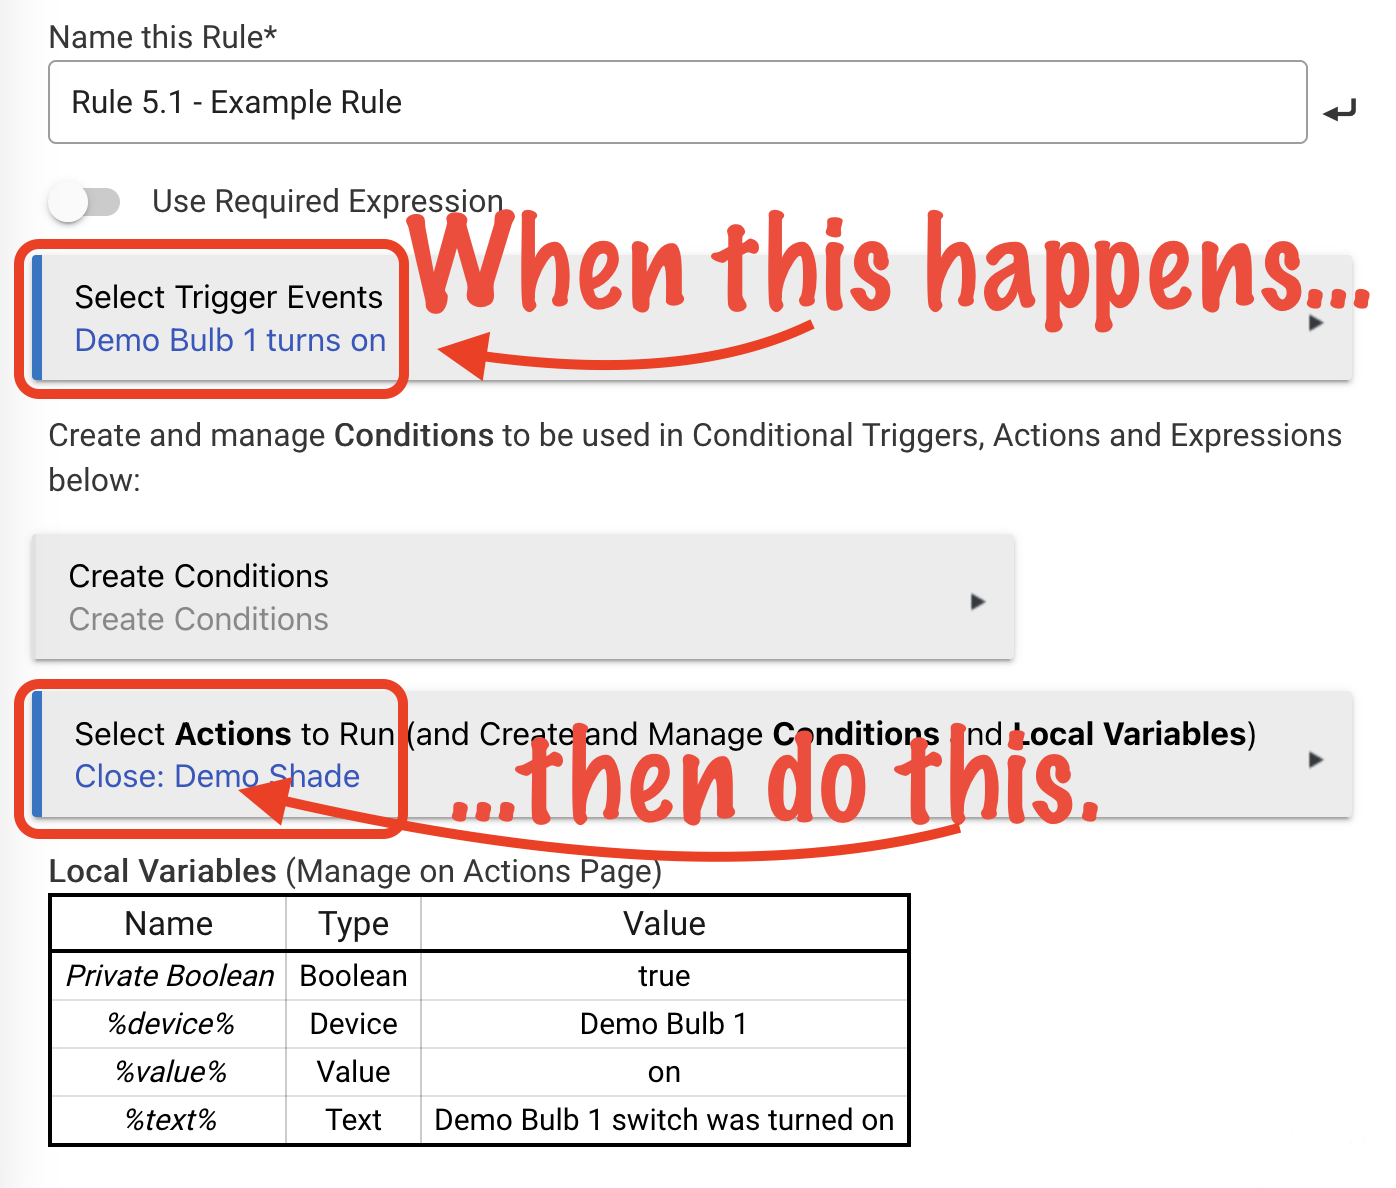 Screenshot: Rule triggers labeled as "When this happens..." and Rule actions labeled as "...then do this"